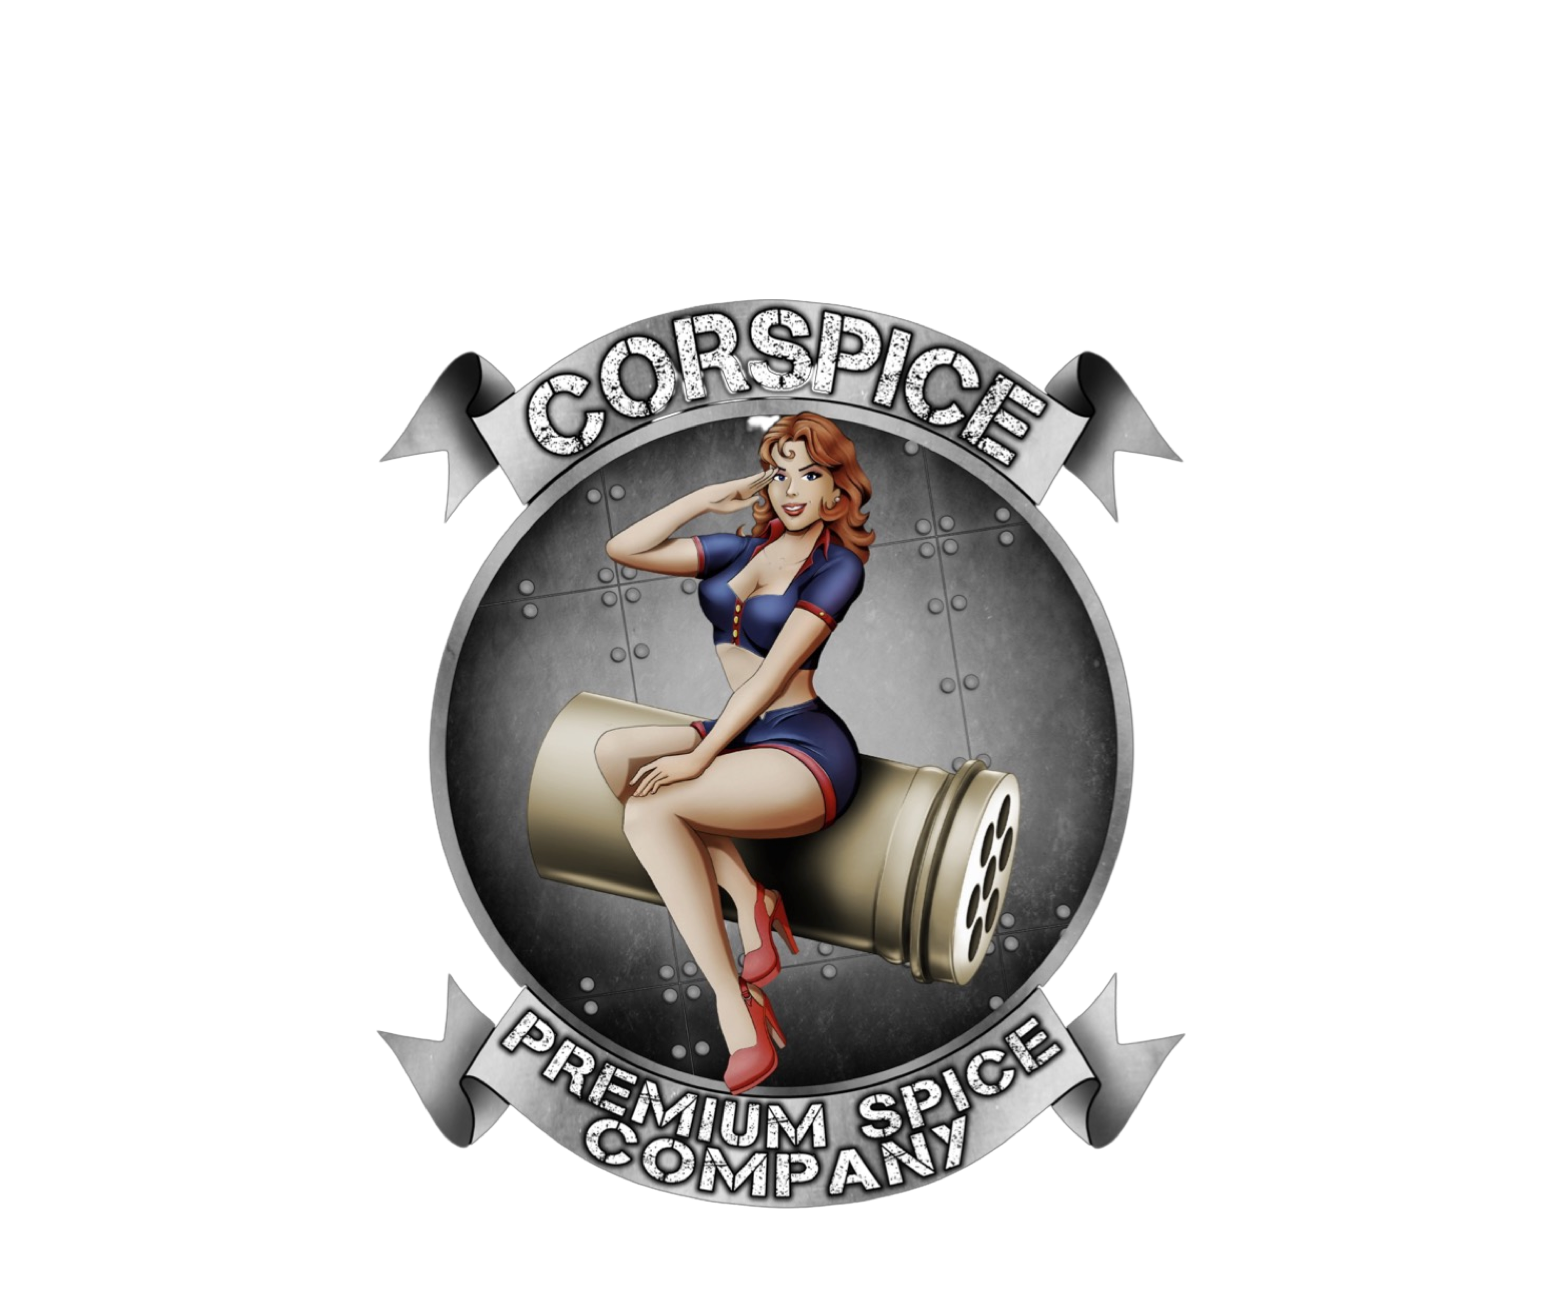 Veteran Owned and Operated Spice Company - Corspice